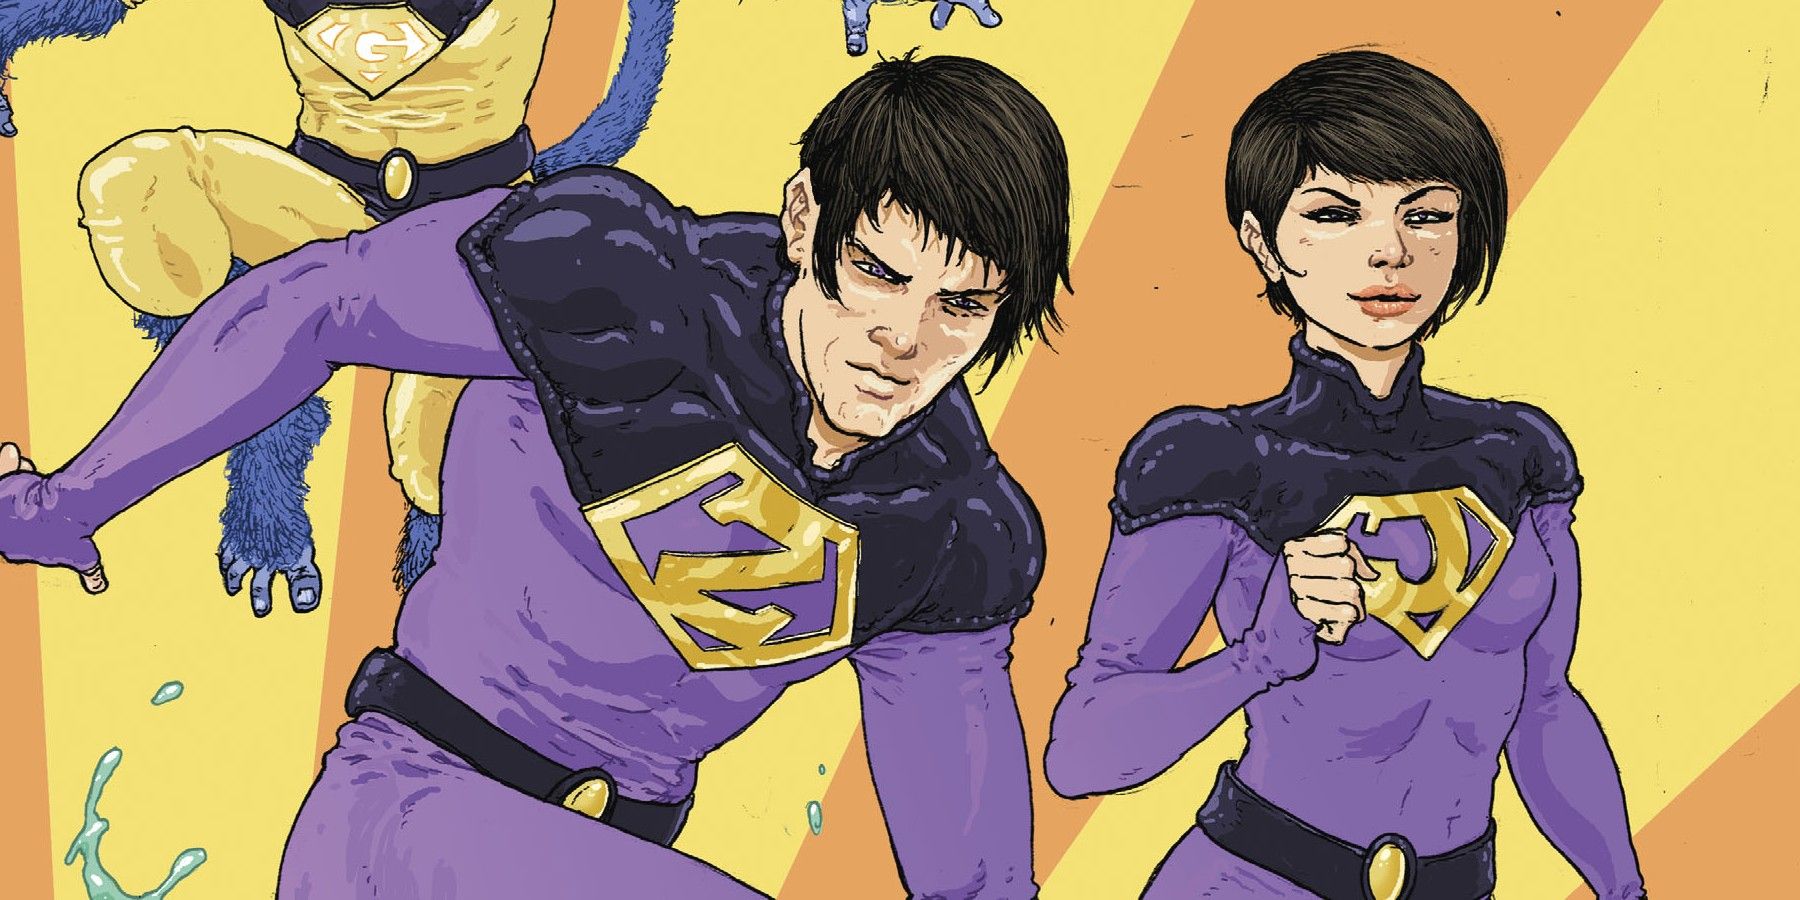 Artwork showing the Wonder Twins in the comics